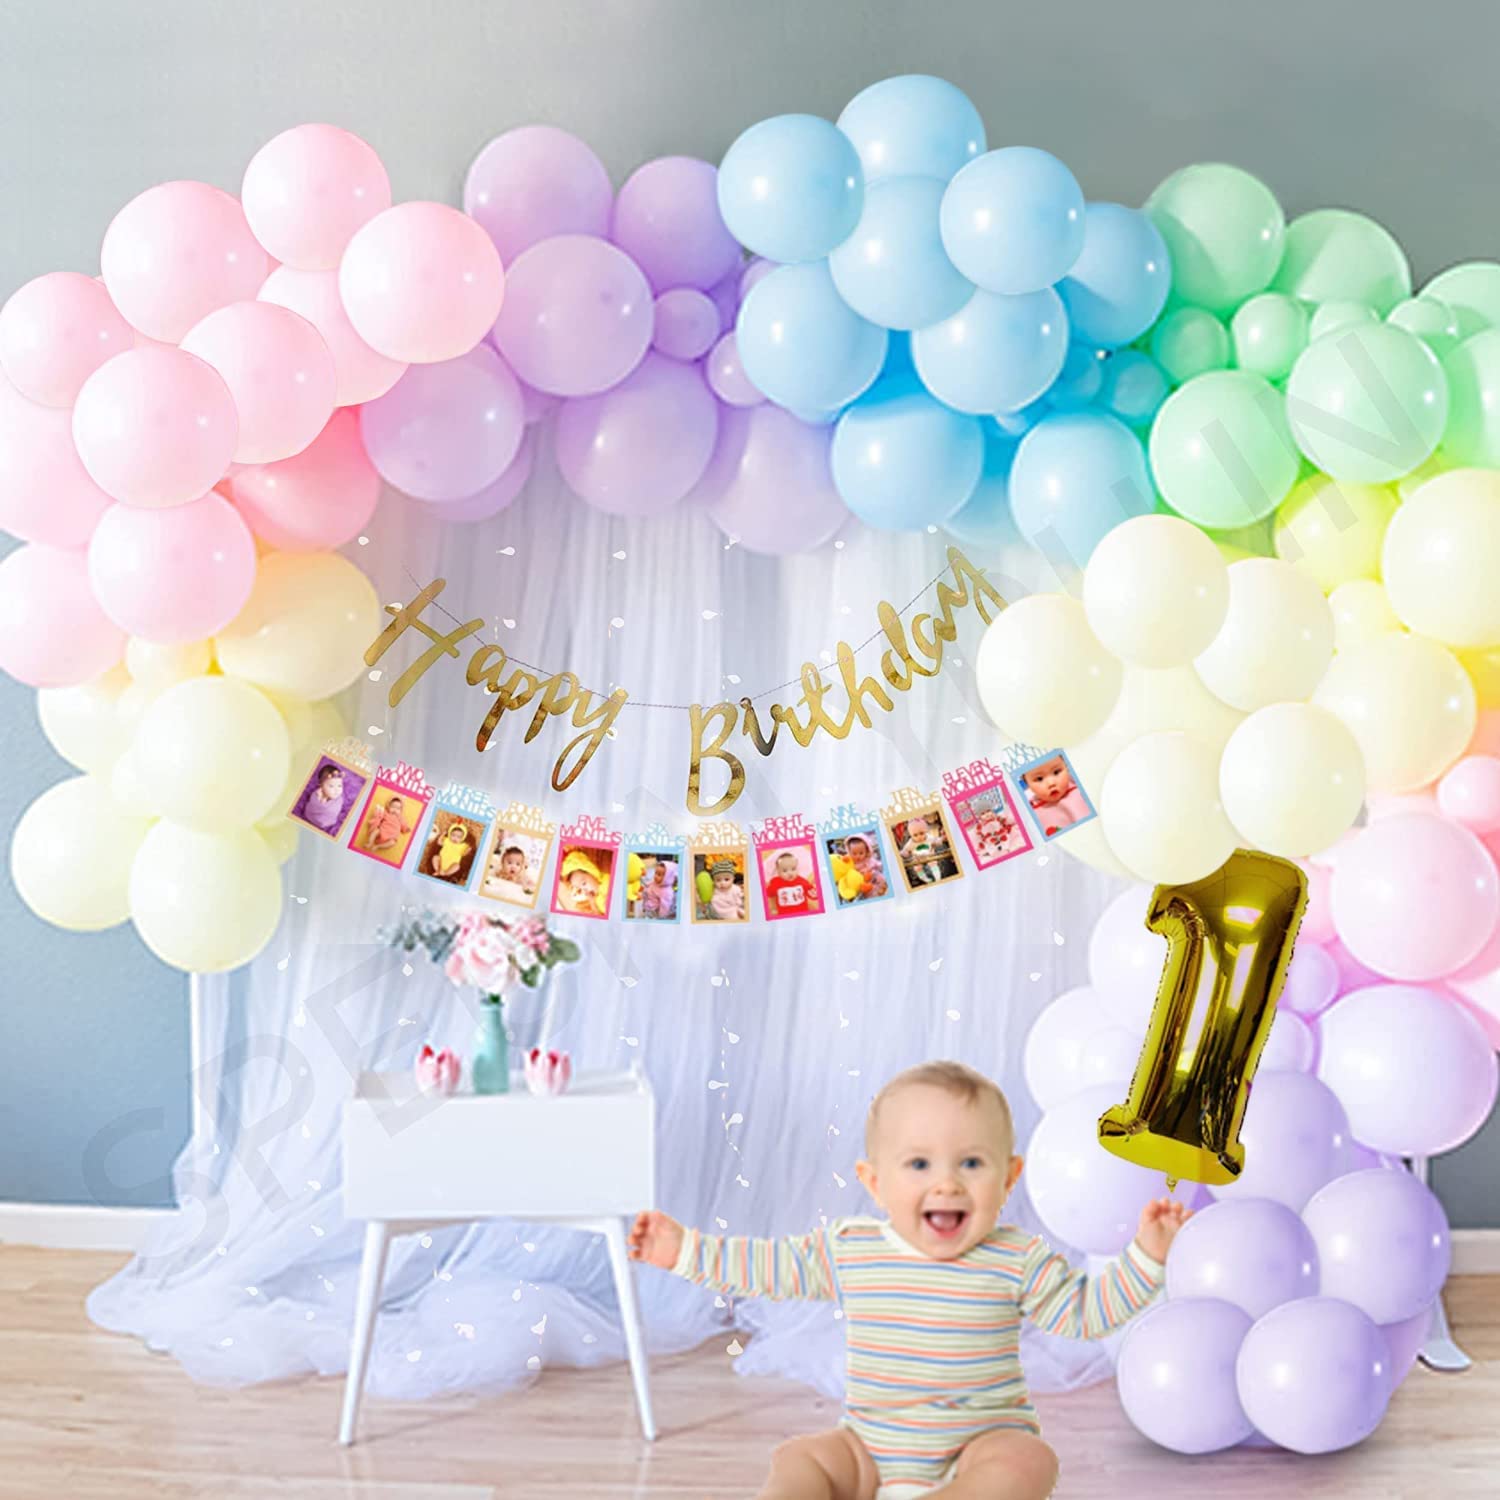 Birthday Decorations for Boys Blue White Gold Birthday Balloons Garland Arch  Kit with Fairy String Light Birthday Party Supplies for Boy1st Birthday  Baby Shower 